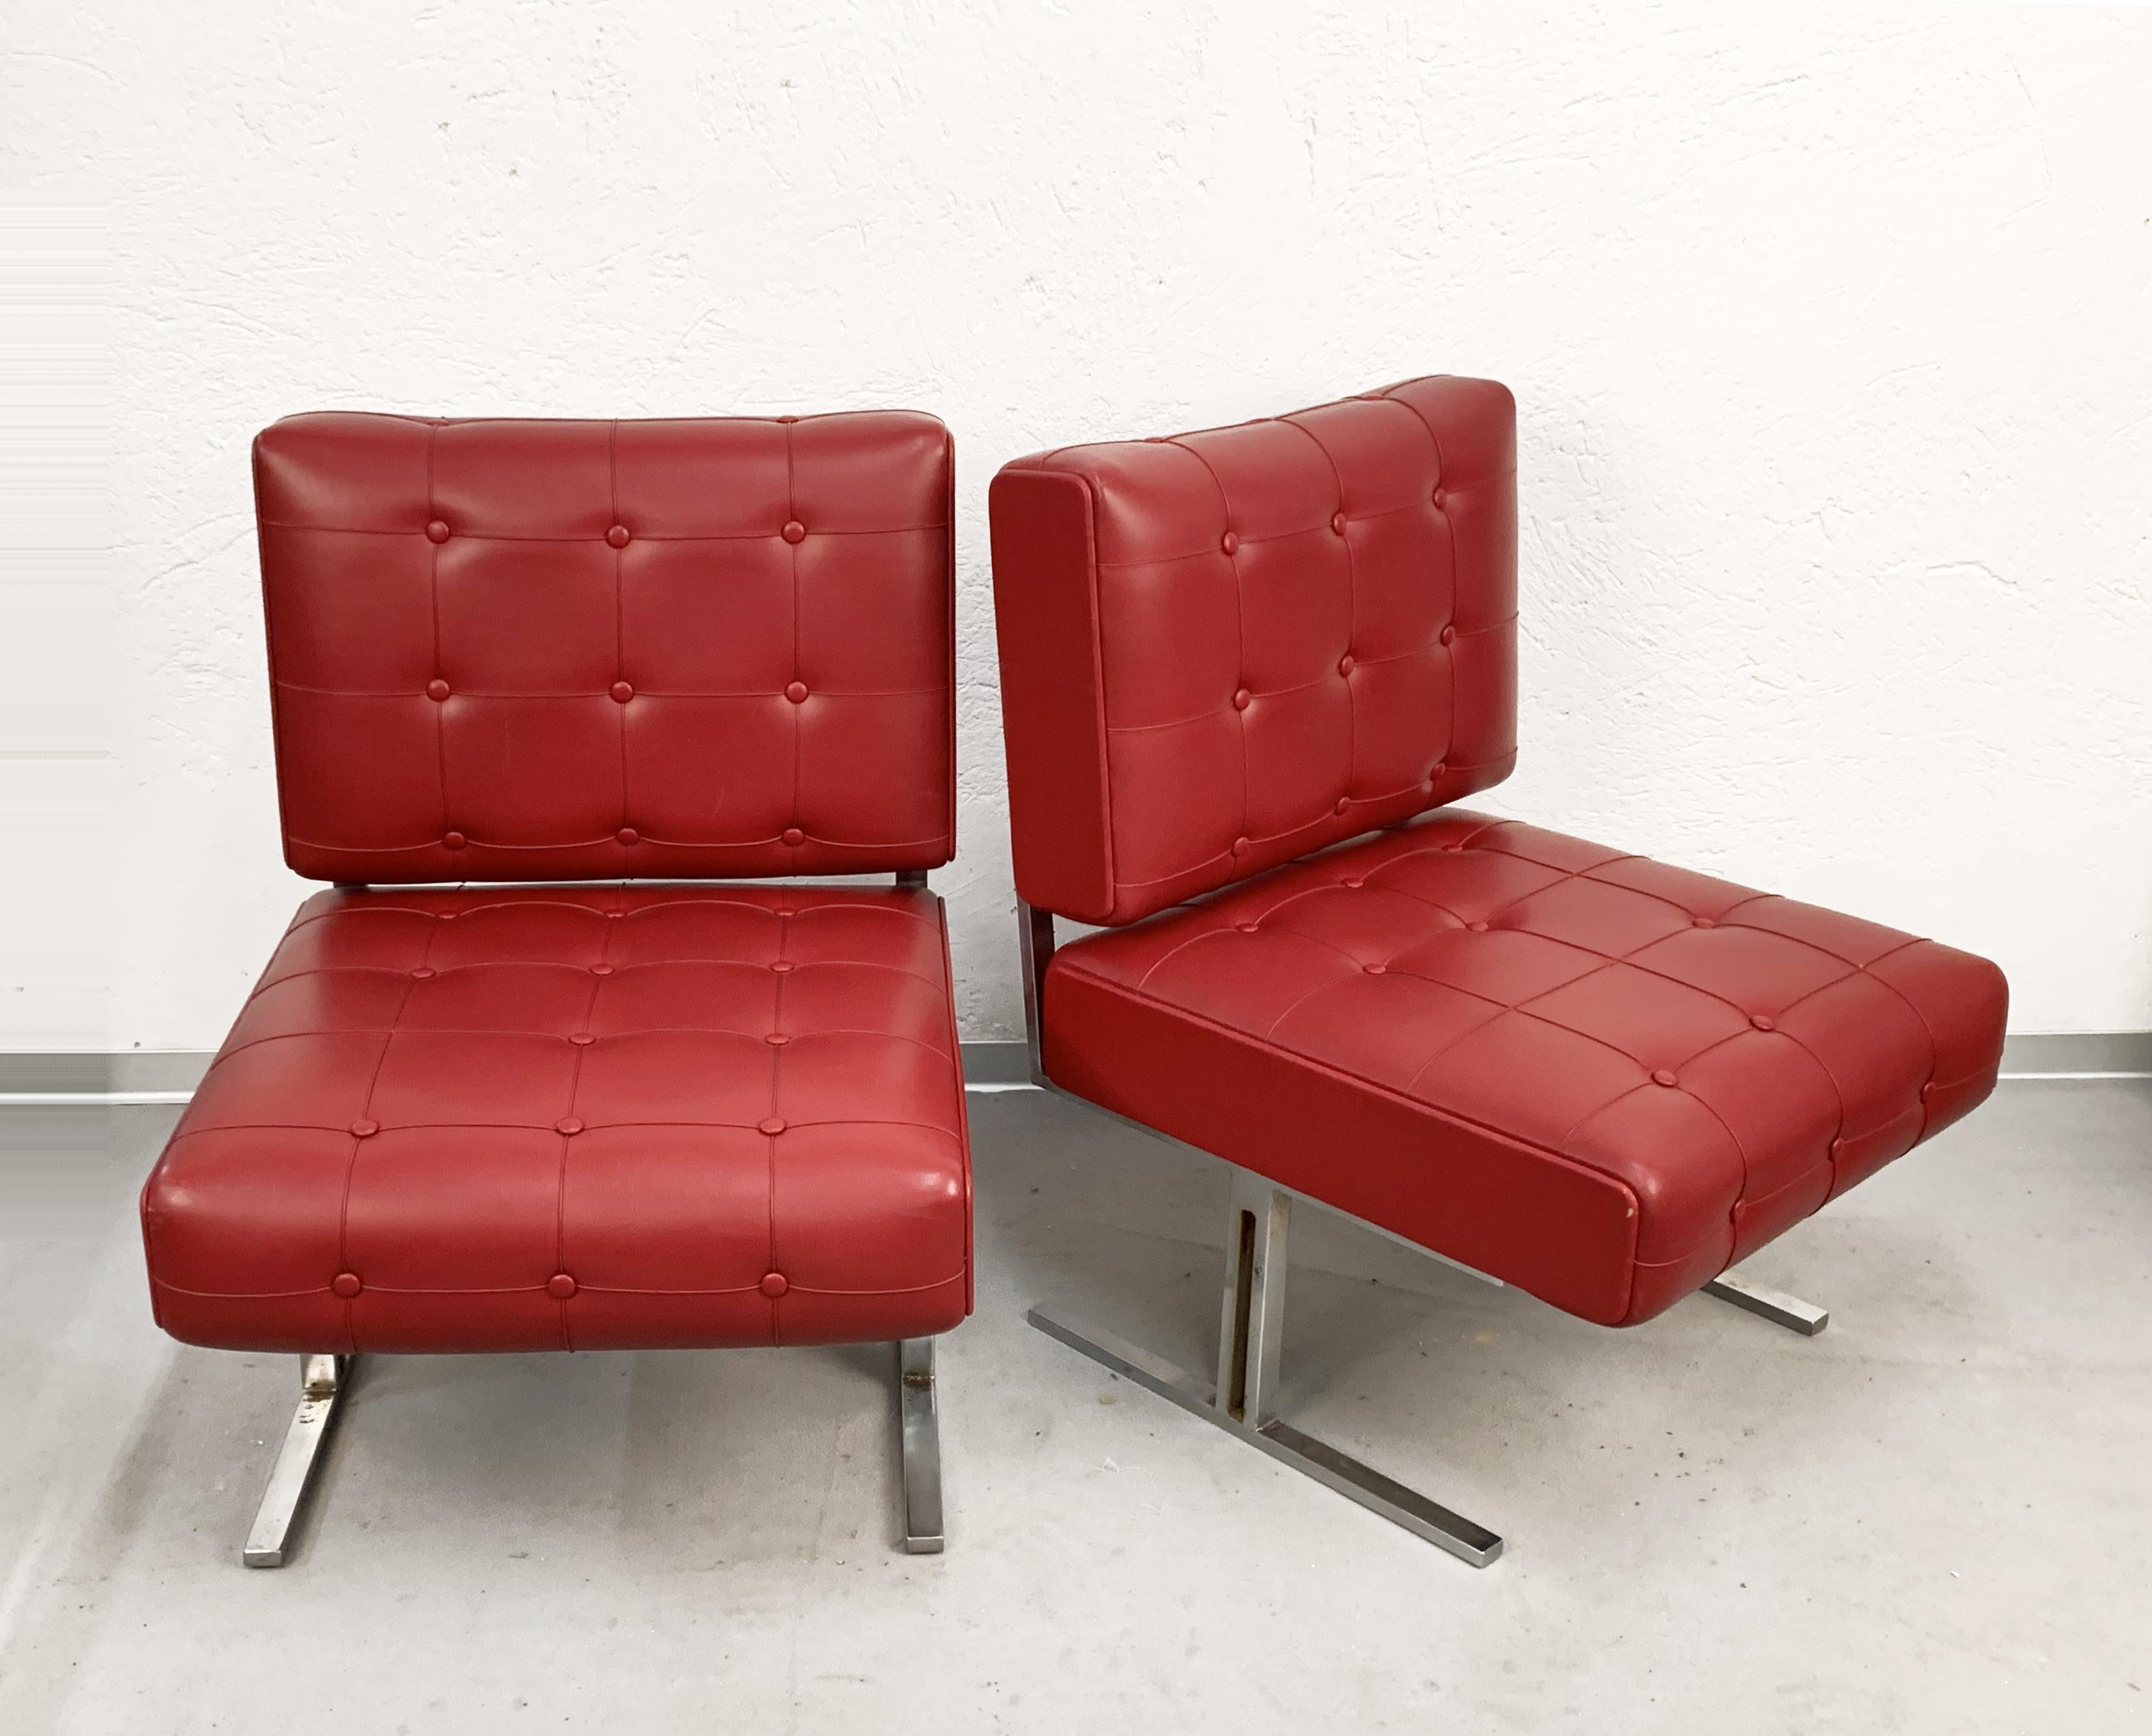 Pair of Steel Armchairs Skay Capitonne Red, Style Hausmann De Sede Italy 1950s For Sale 10